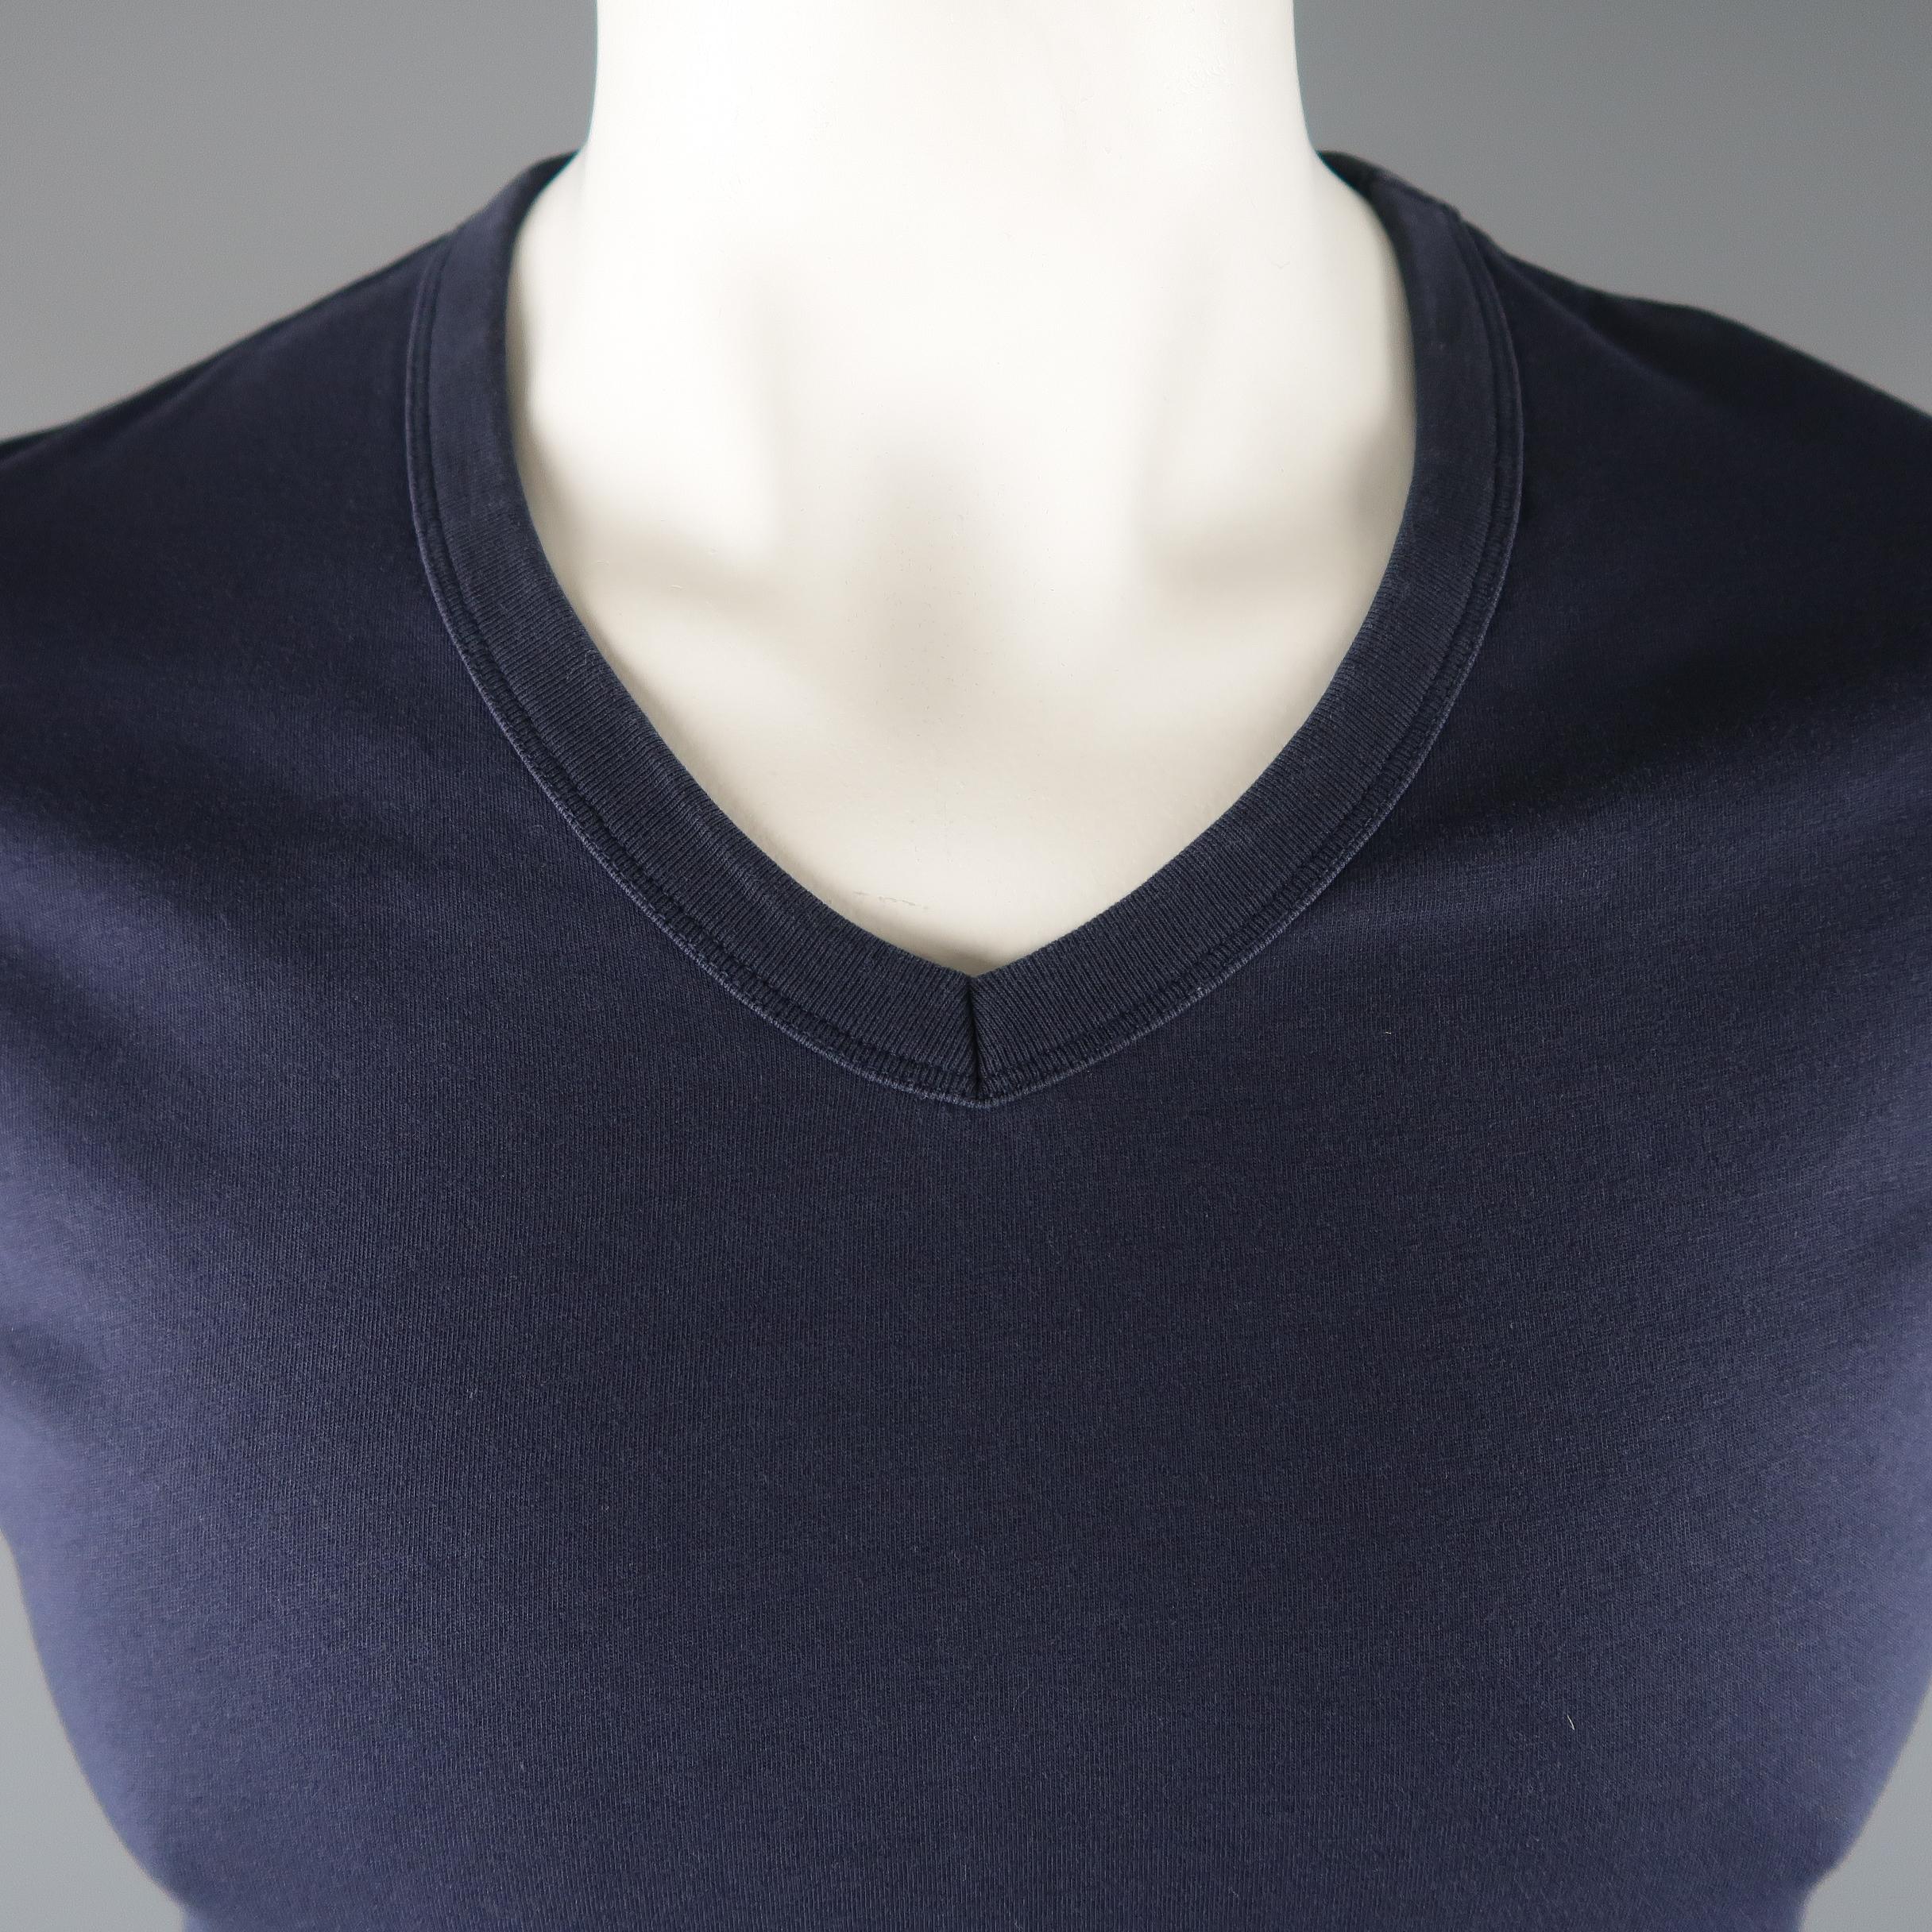 MAISON MARTIN MARGIELA T-shirt come in a navy solid cotton material, with a V-neck.
 
Excellent Pre-Owned Condition.
Marked: 50 IT
 
Measurements:
 
Shoulder: 16  in.  
Chest: 40  in.
Sleeve: 8.5  in.
Length: 26  in.